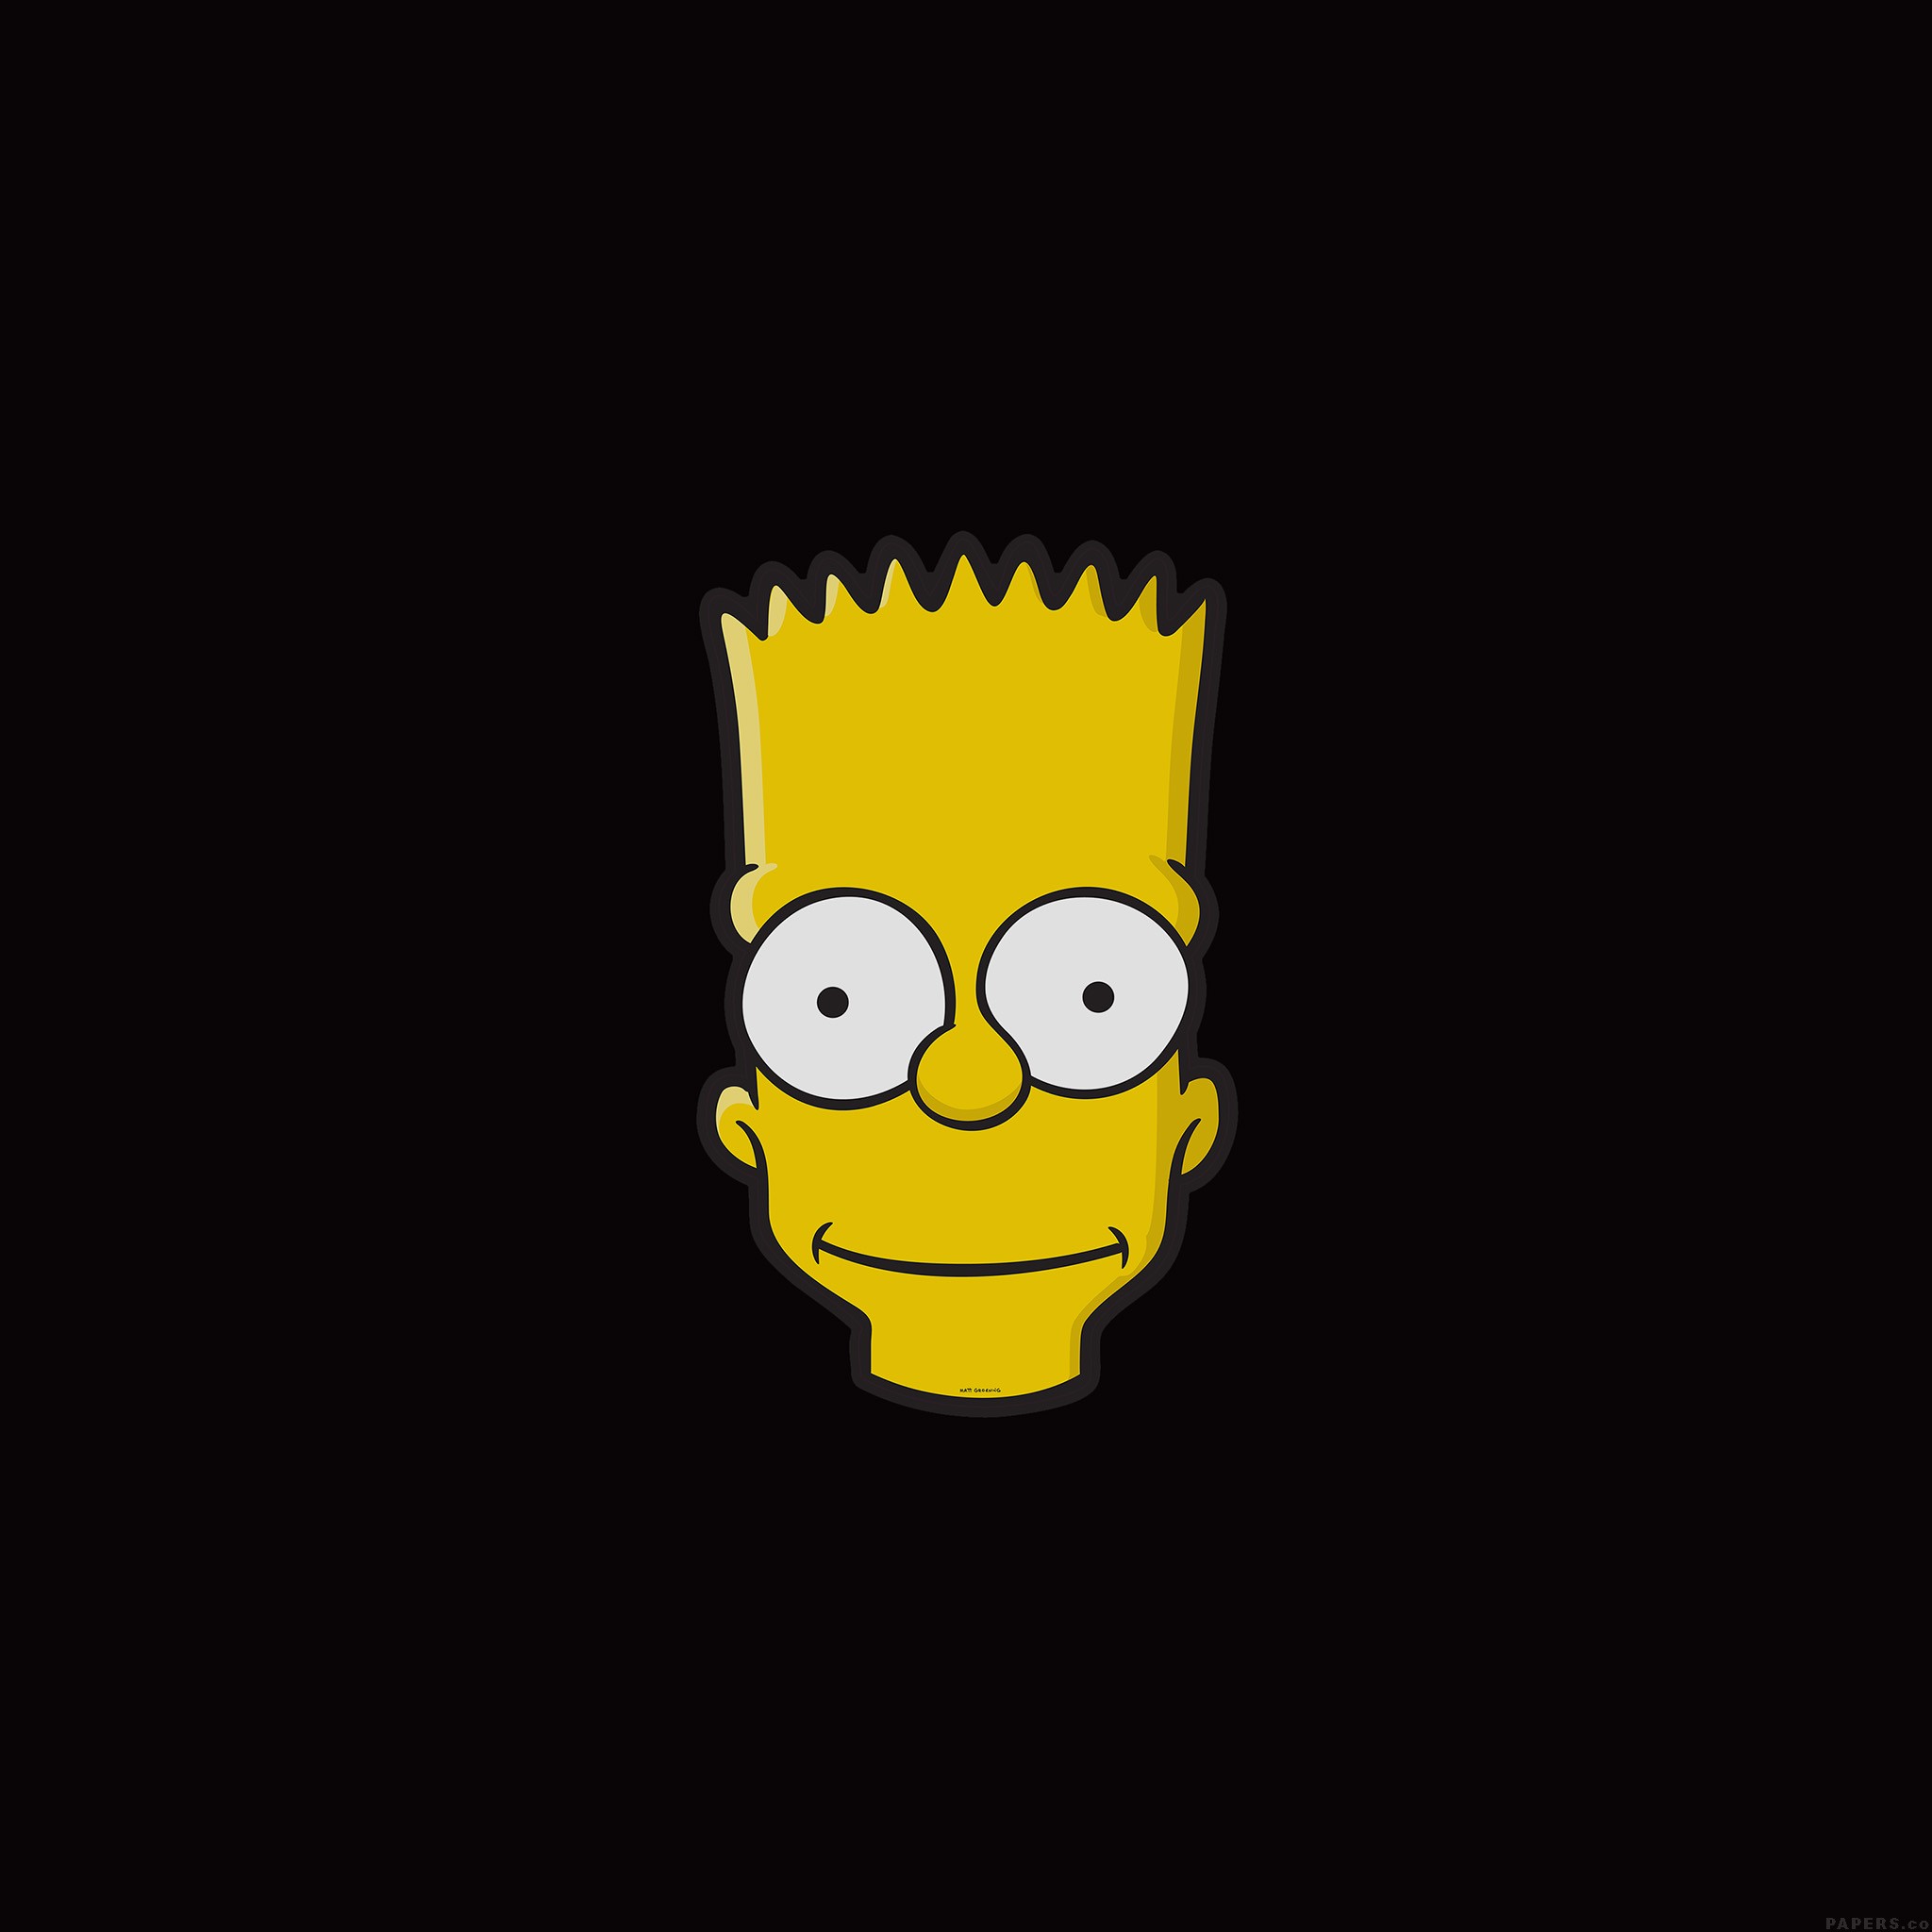 General 2048x2048 Bart Simpson The Simpsons cartoon TV series face black background simple background